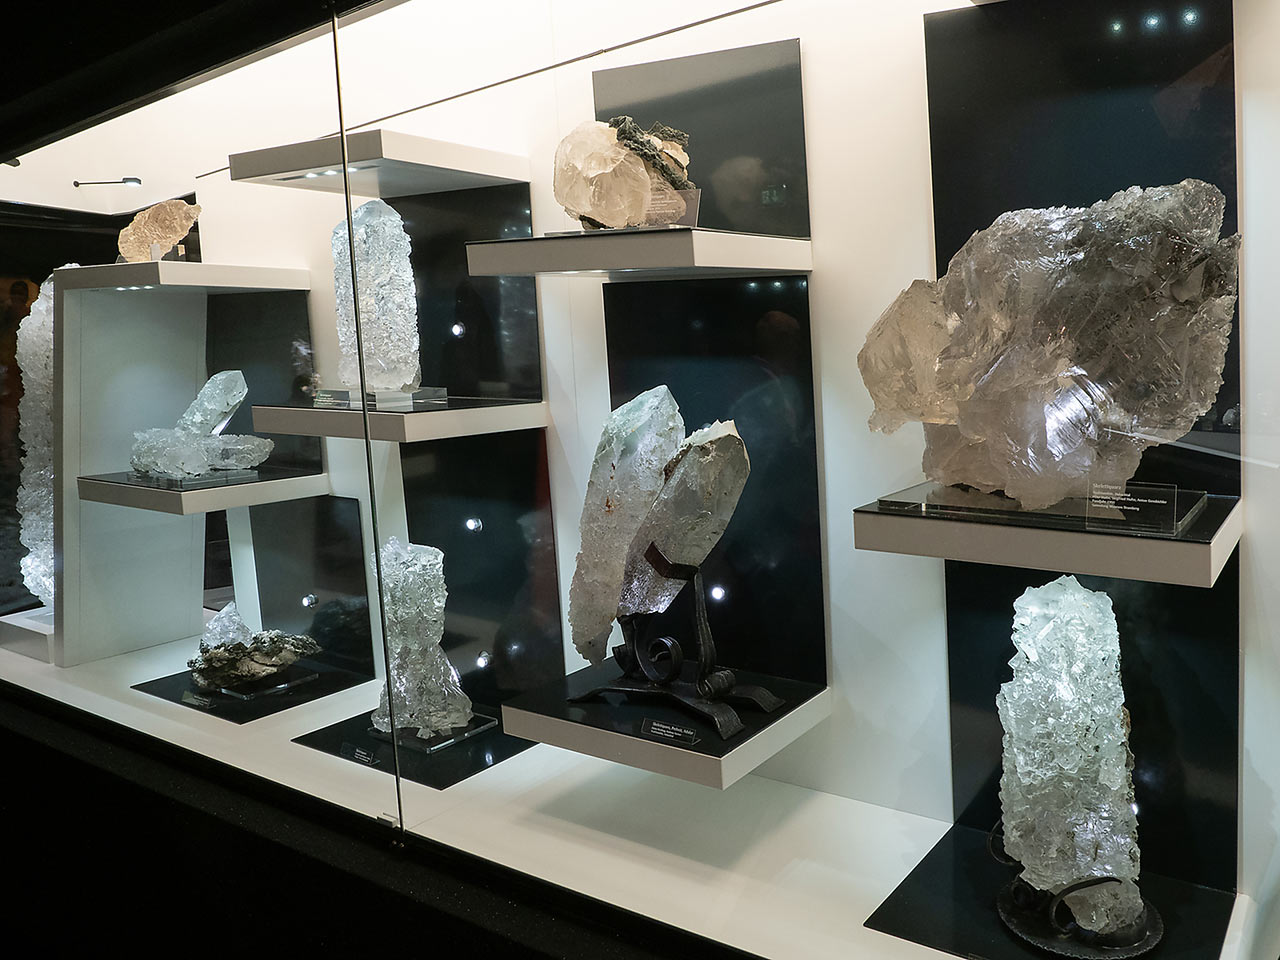 Display with the huge etched quartz crystals from Habachtal, Austria